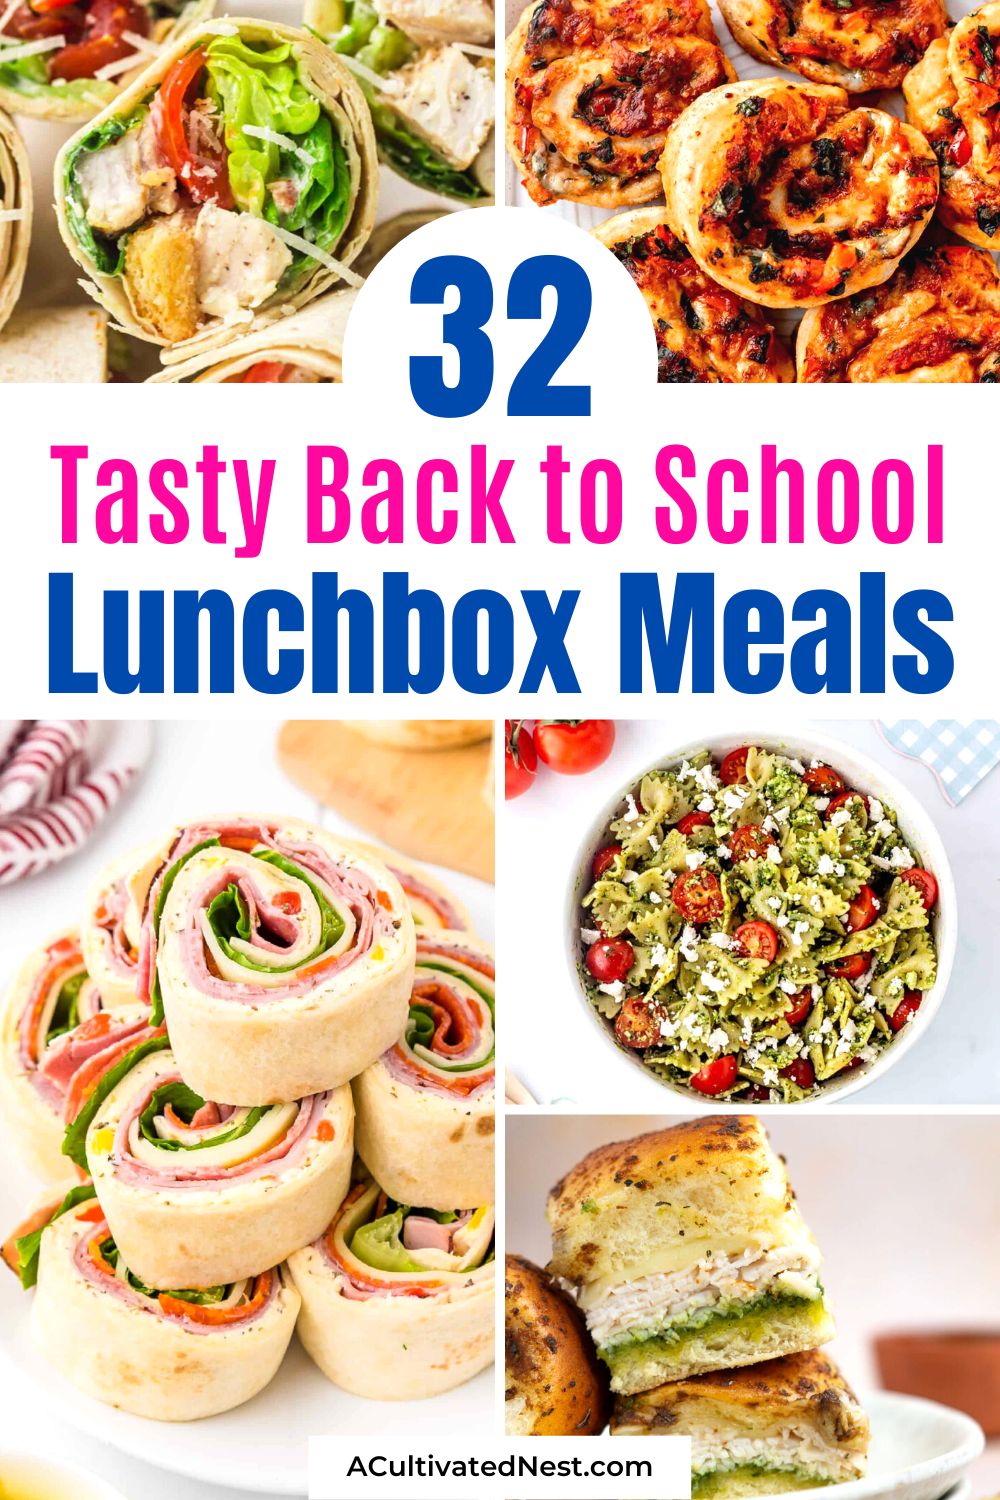 32 Tasty Back-to-School Lunchbox Meals- Elevate your lunch game with these mouthwatering back-to-school lunchbox meal ideas. Whether you're a student or just seeking fresh lunch inspiration for your kids, these recipes combine taste and nutrition in every bite. | #schoolLunches #recipes #backToSchool #lunchboxMeals #ACultivatedNest